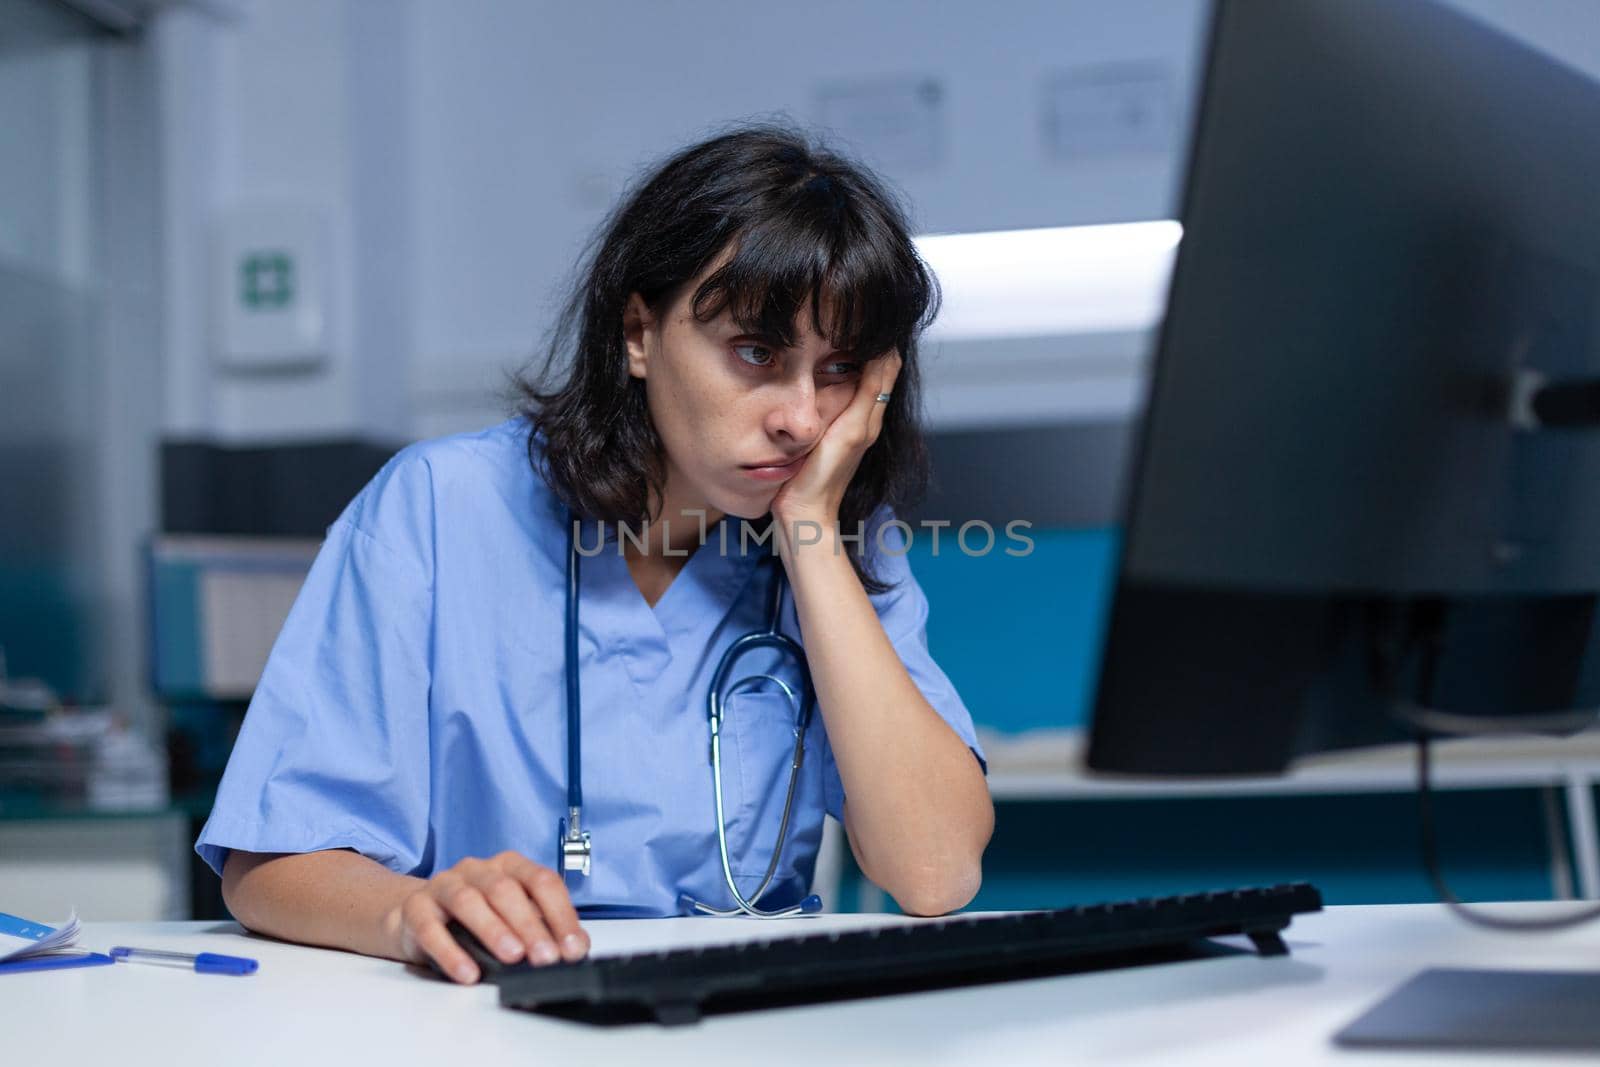 Medical specialist falling asleep at desk and using computer, working late at night. Woman assistant feeling burnout and exhaustion after doing overtime work on monitor for healthcare